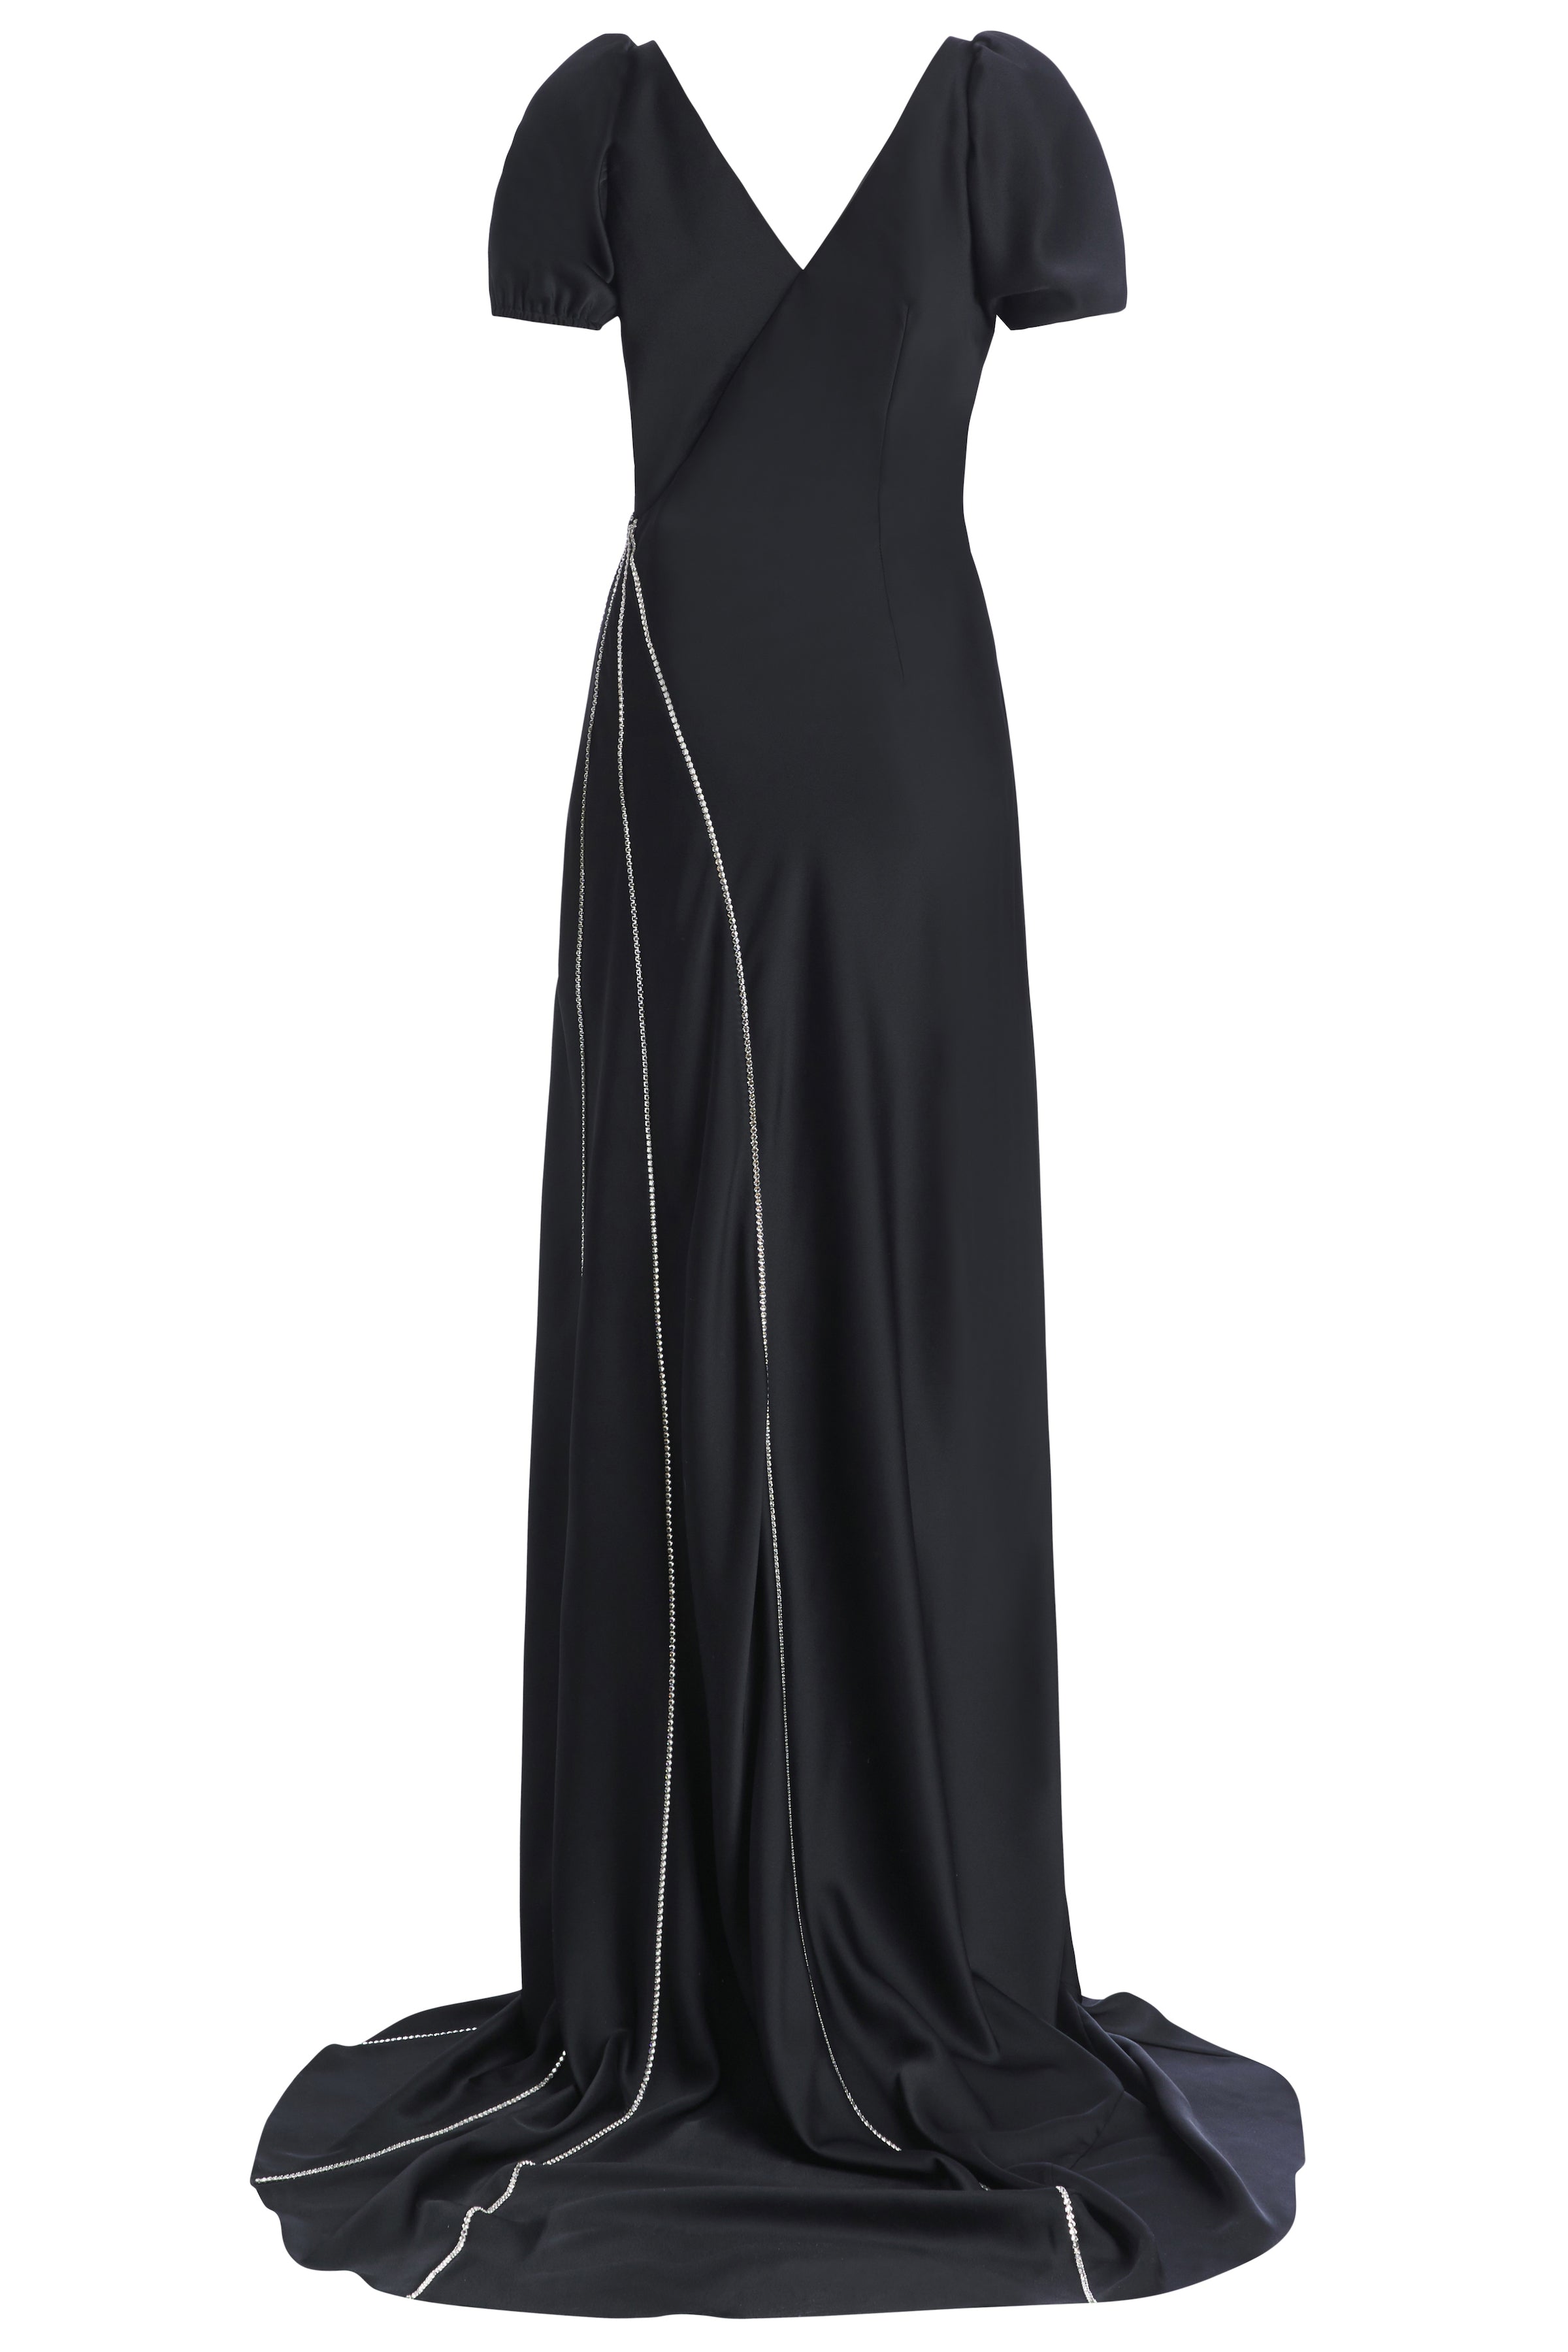 Maxine Black Puff Sleeve Crepe Gown With Swarovski Crystal Seam Details